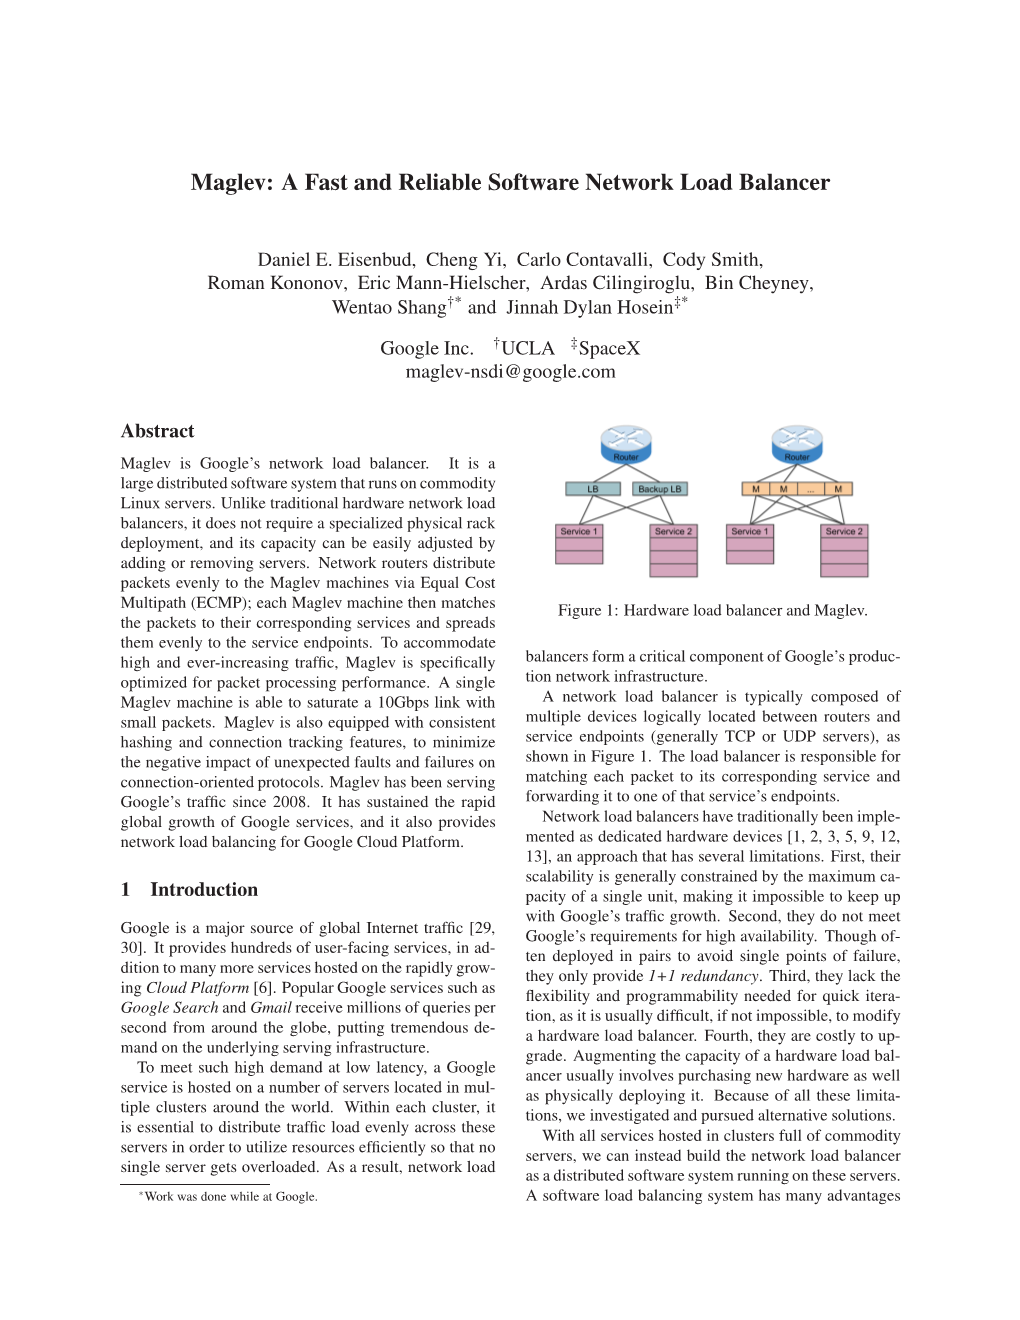 Maglev: a Fast and Reliable Software Network Load Balancer